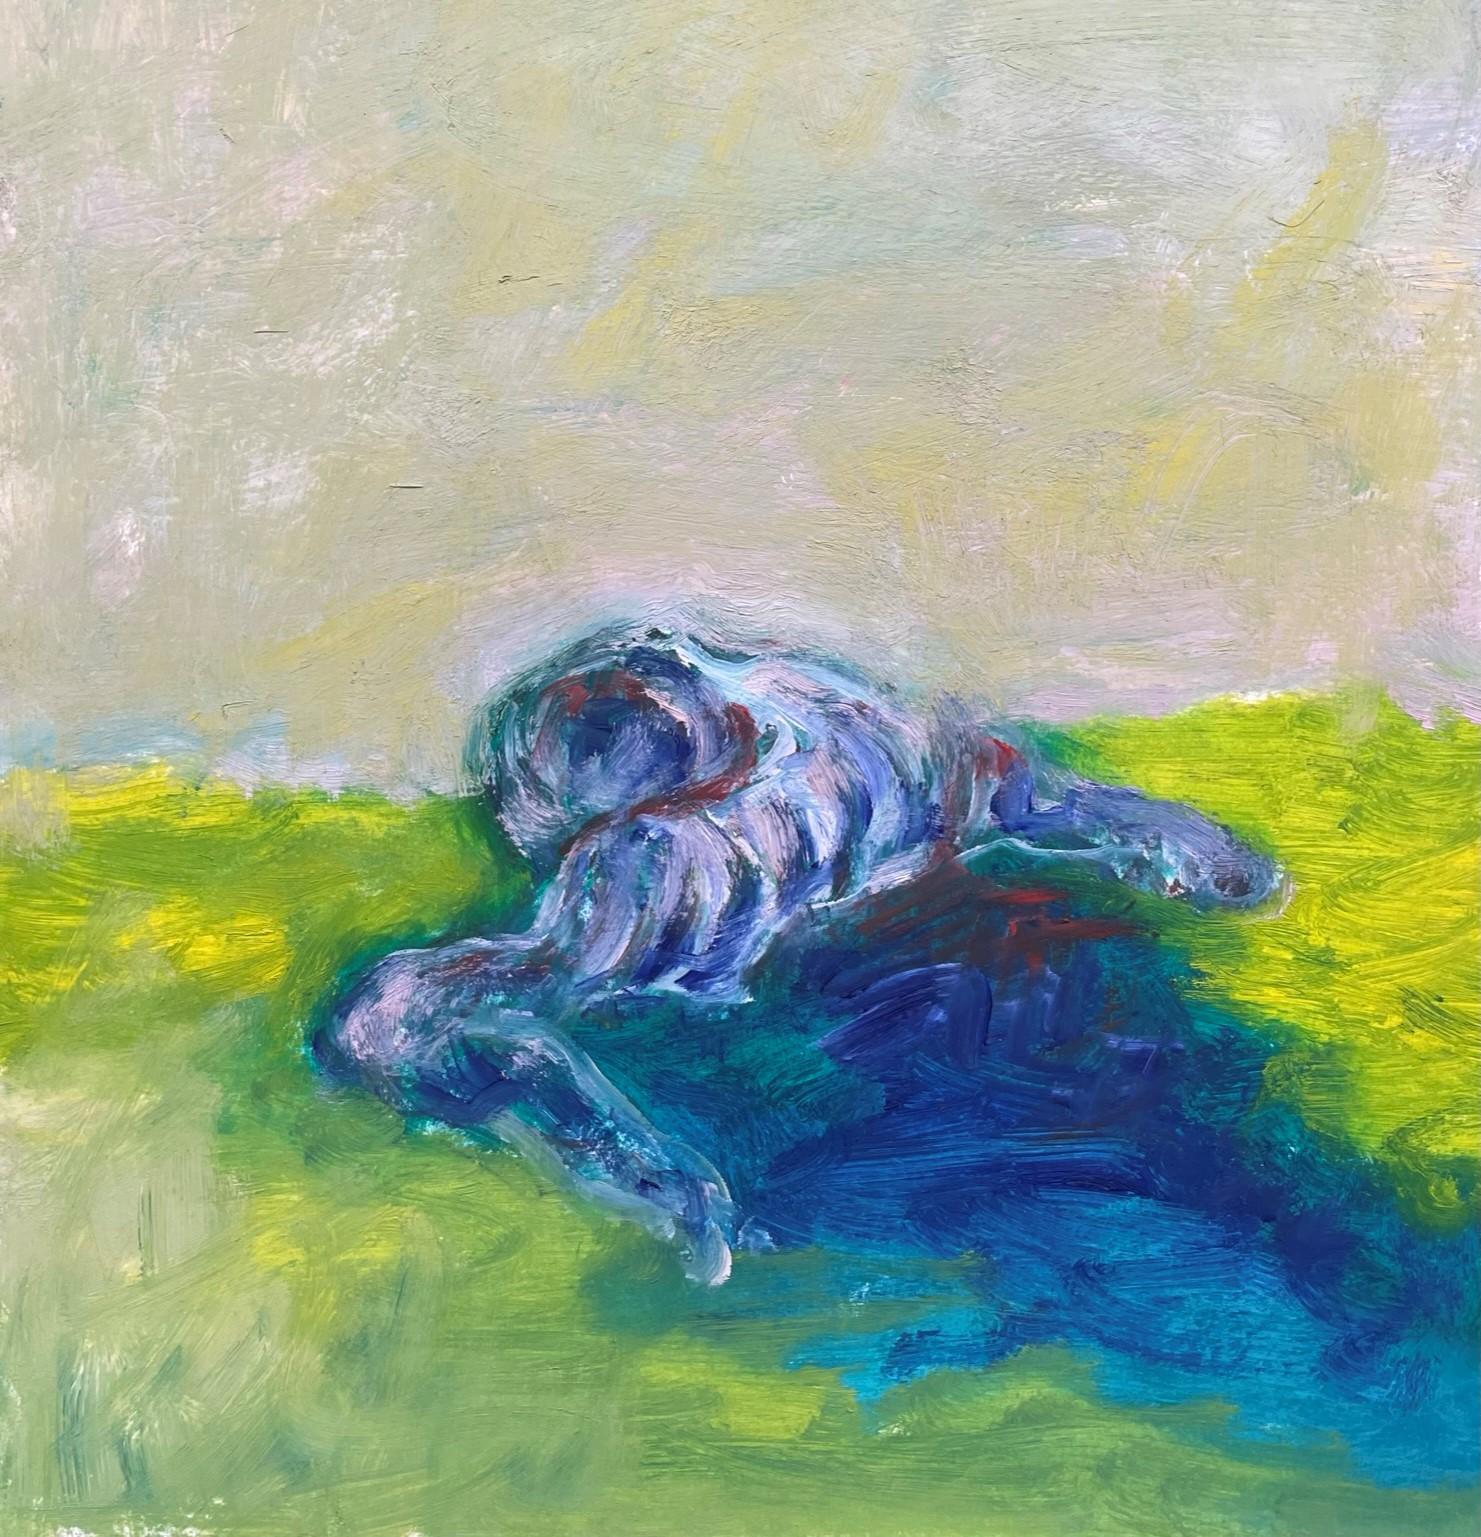 Remains (Body in the Field 12) - Contemporary, Green, Blue, Painting On Paper - Abstract Expressionist Art by Zsolt Berszán